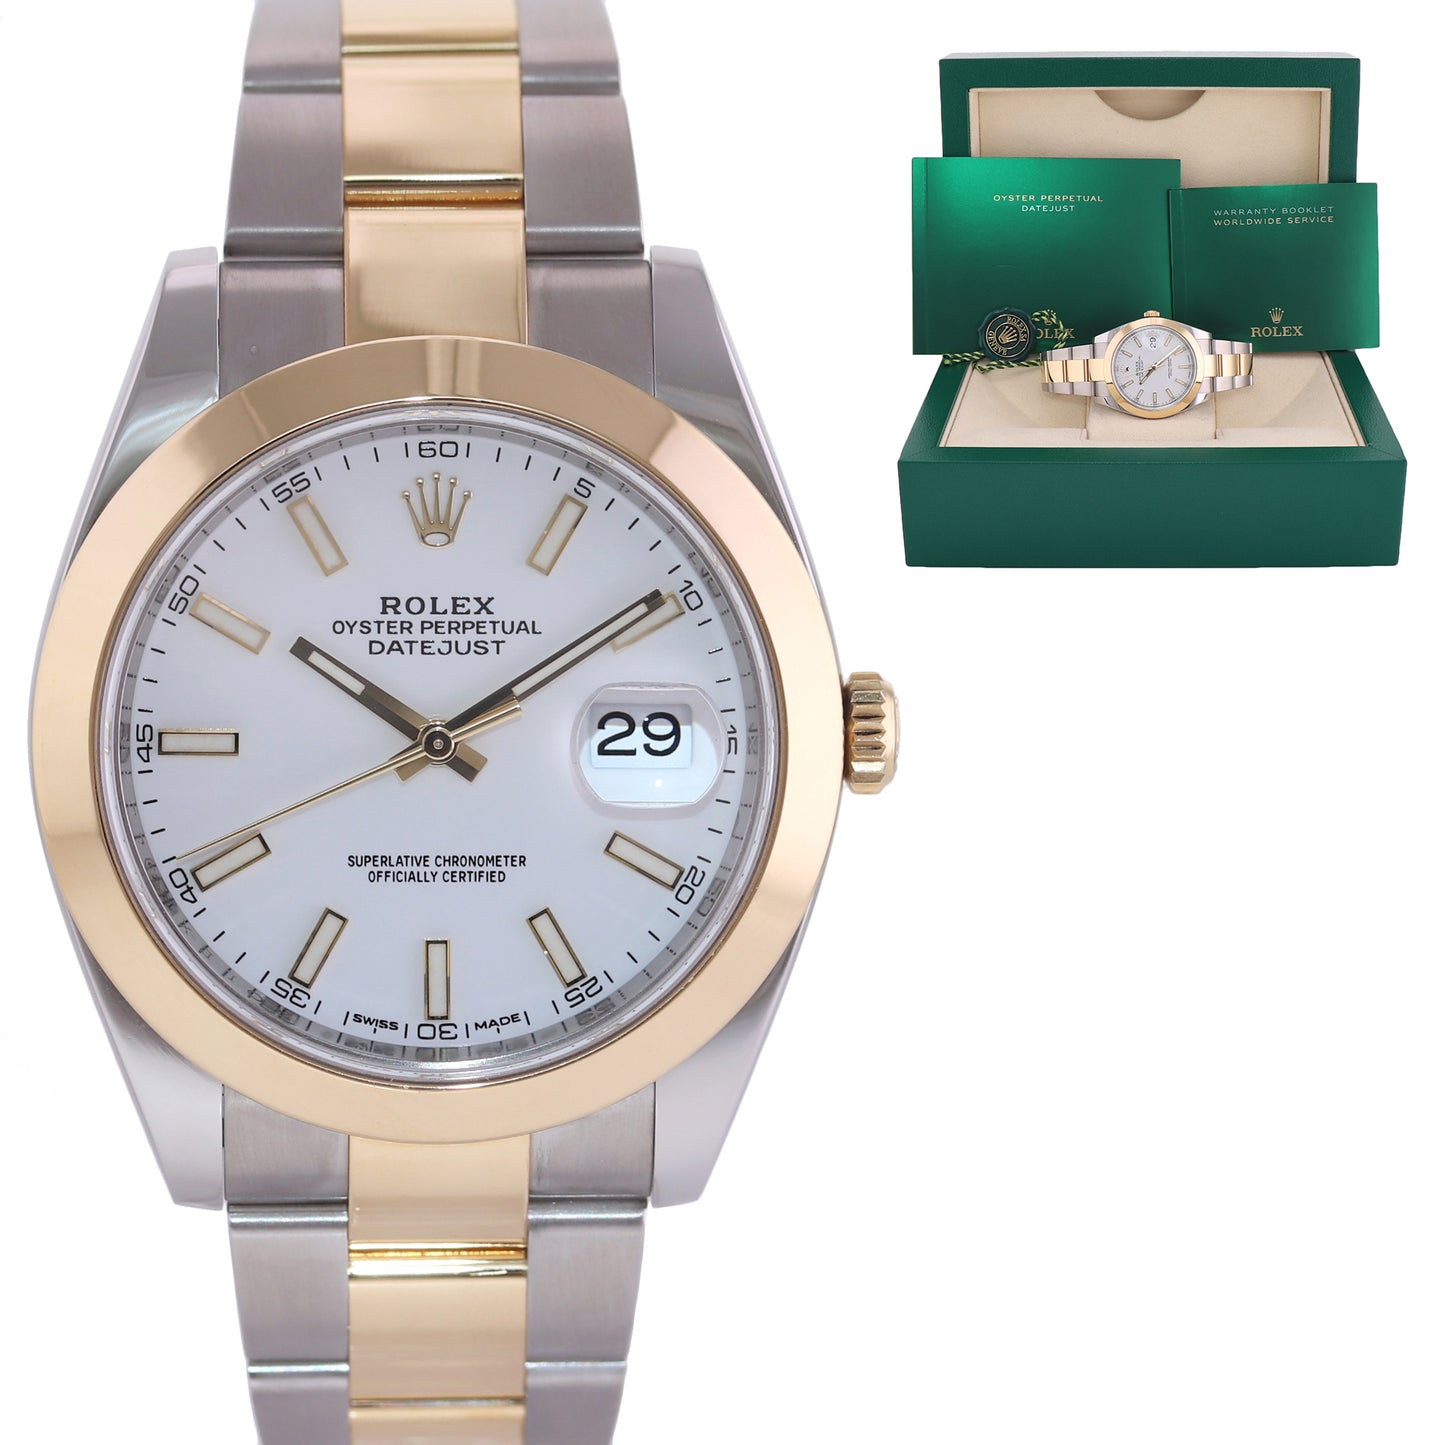 MINT Rolex DateJust 41 126303 Two Tone Gold Steel Oyster White Dial Watch Box